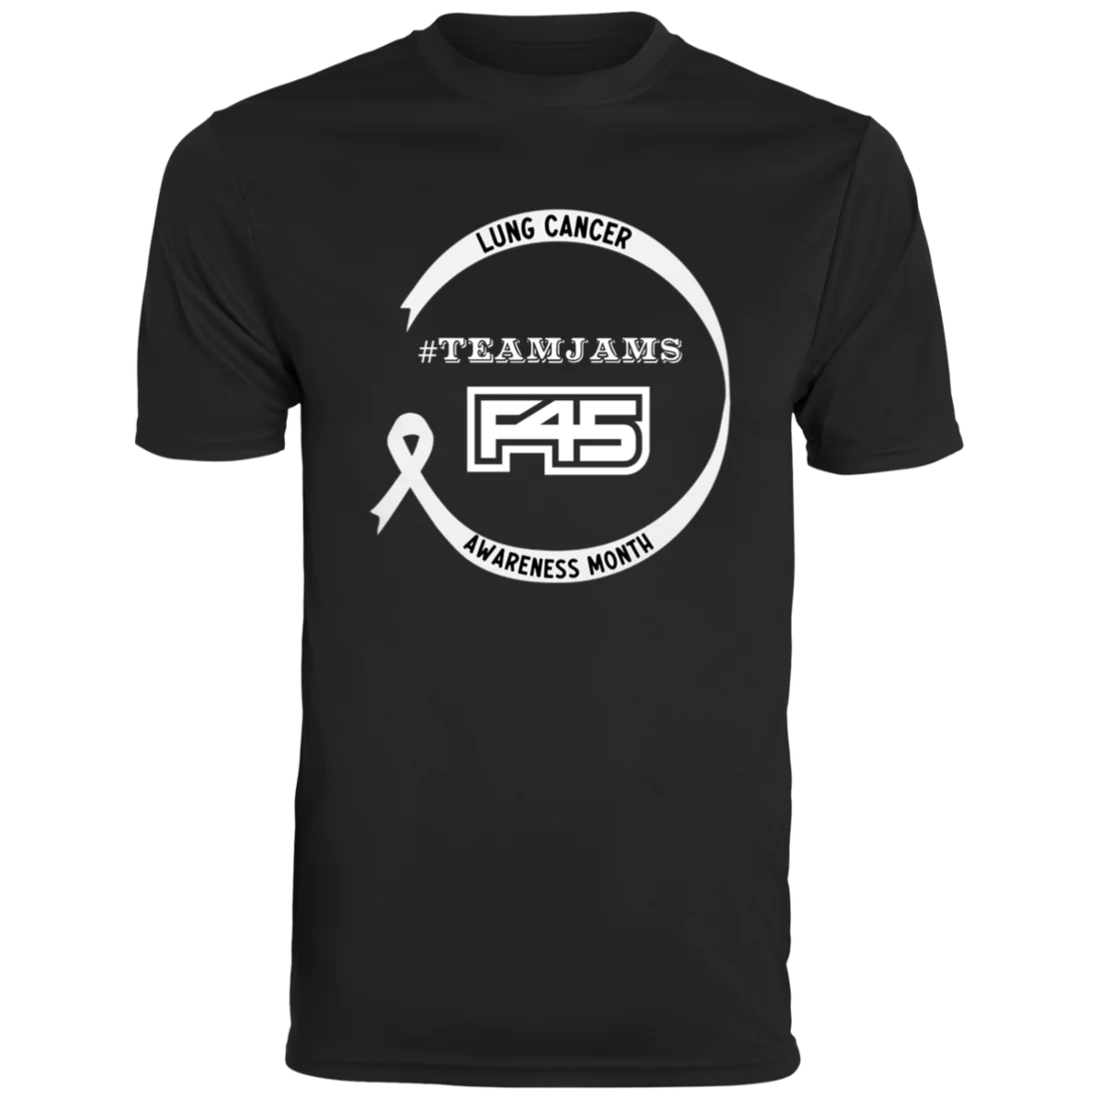 F45 Lung Cancer Awareness Month Promo Merch